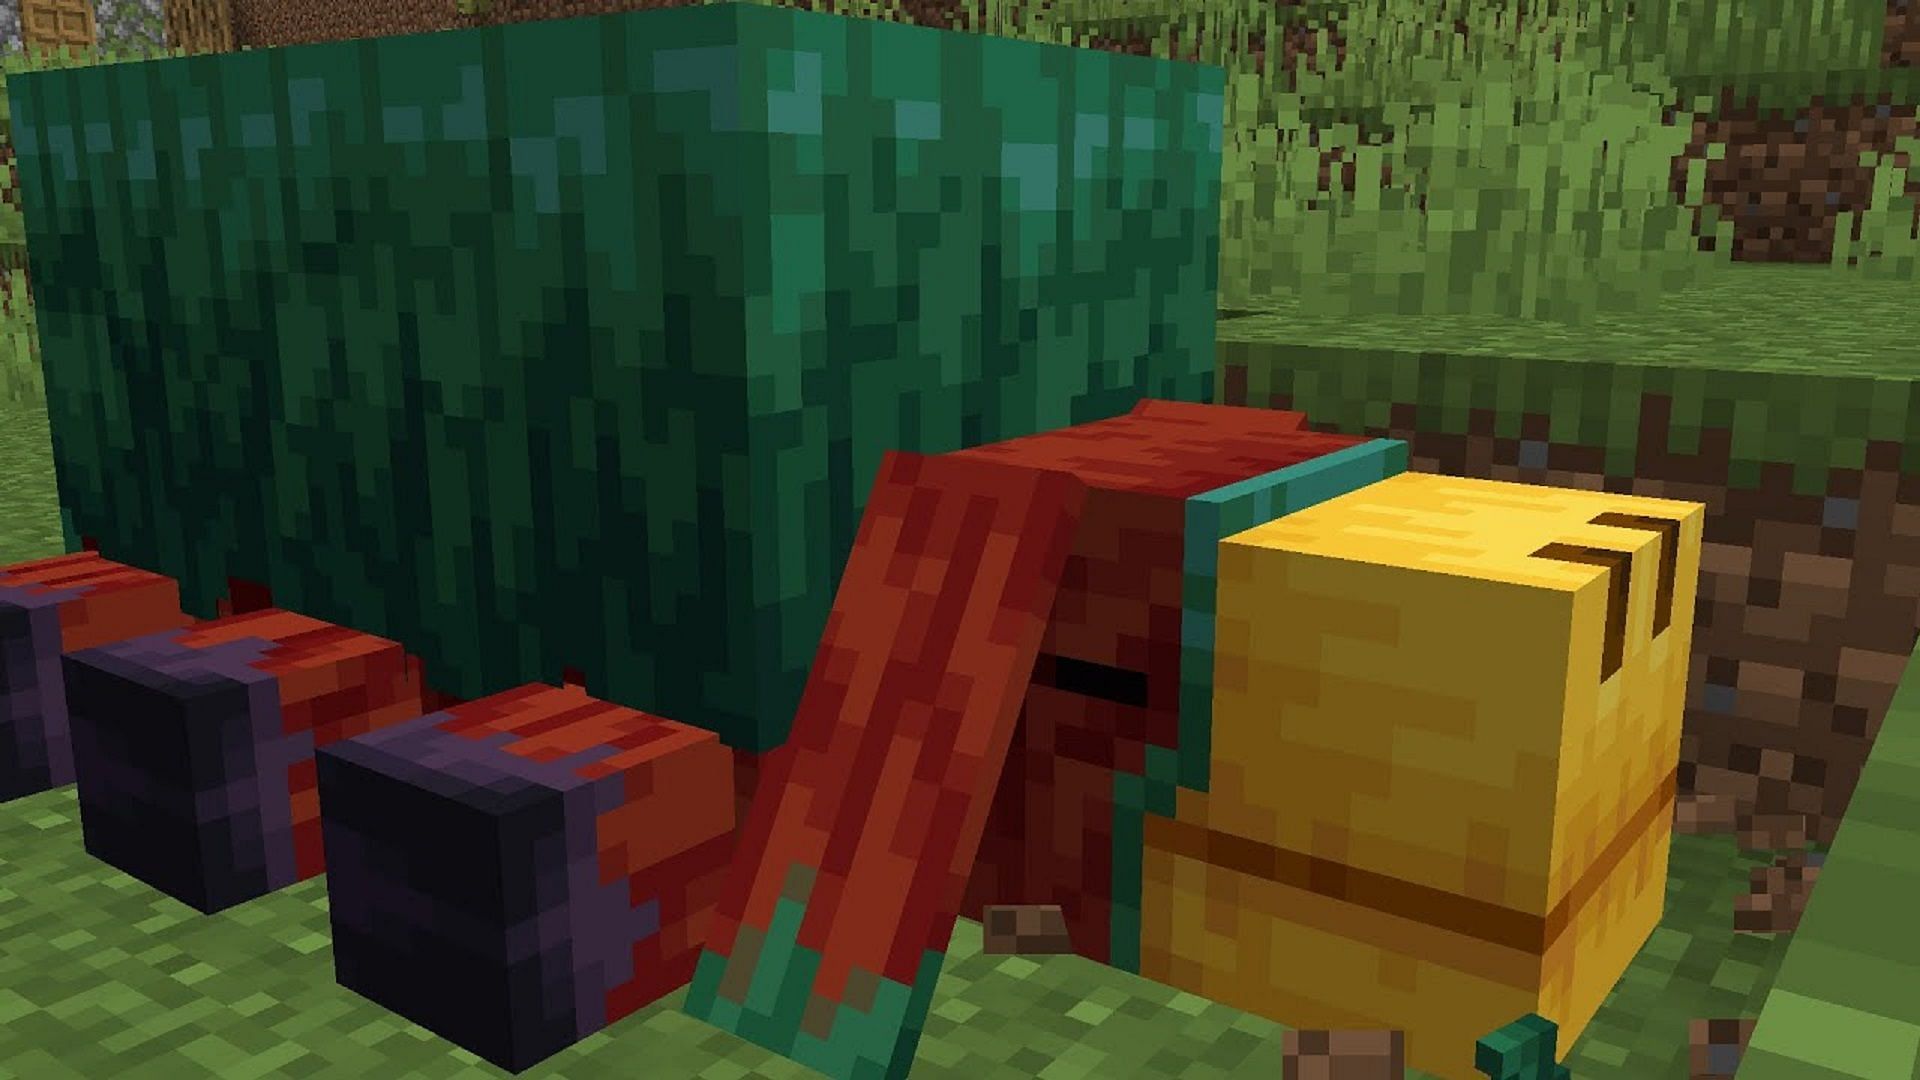 A sniffer takes a snooze in snapshot 23w07a (Image via AlanHunter/YouTube)